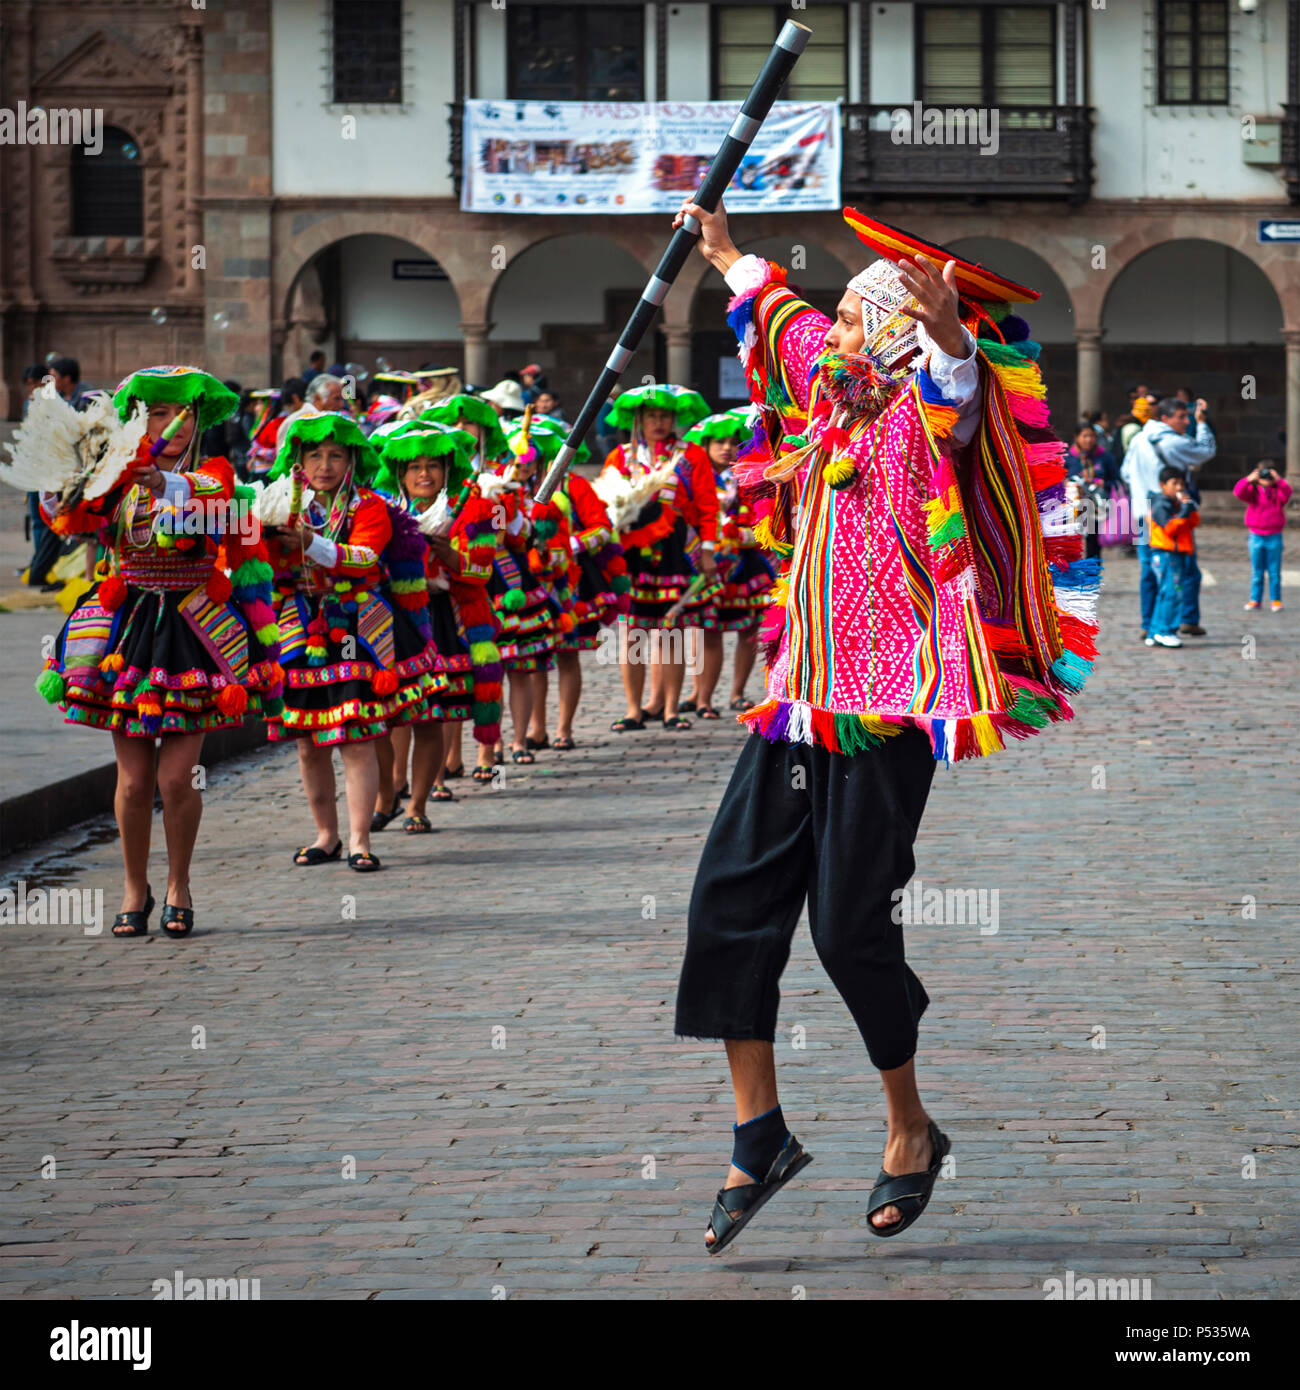 Young Quechua male dancer performing during the Inti Raymi Sun festival in traditional clothing and hat on the Plaza de Armas of Cusco, Peru. Stock Photo